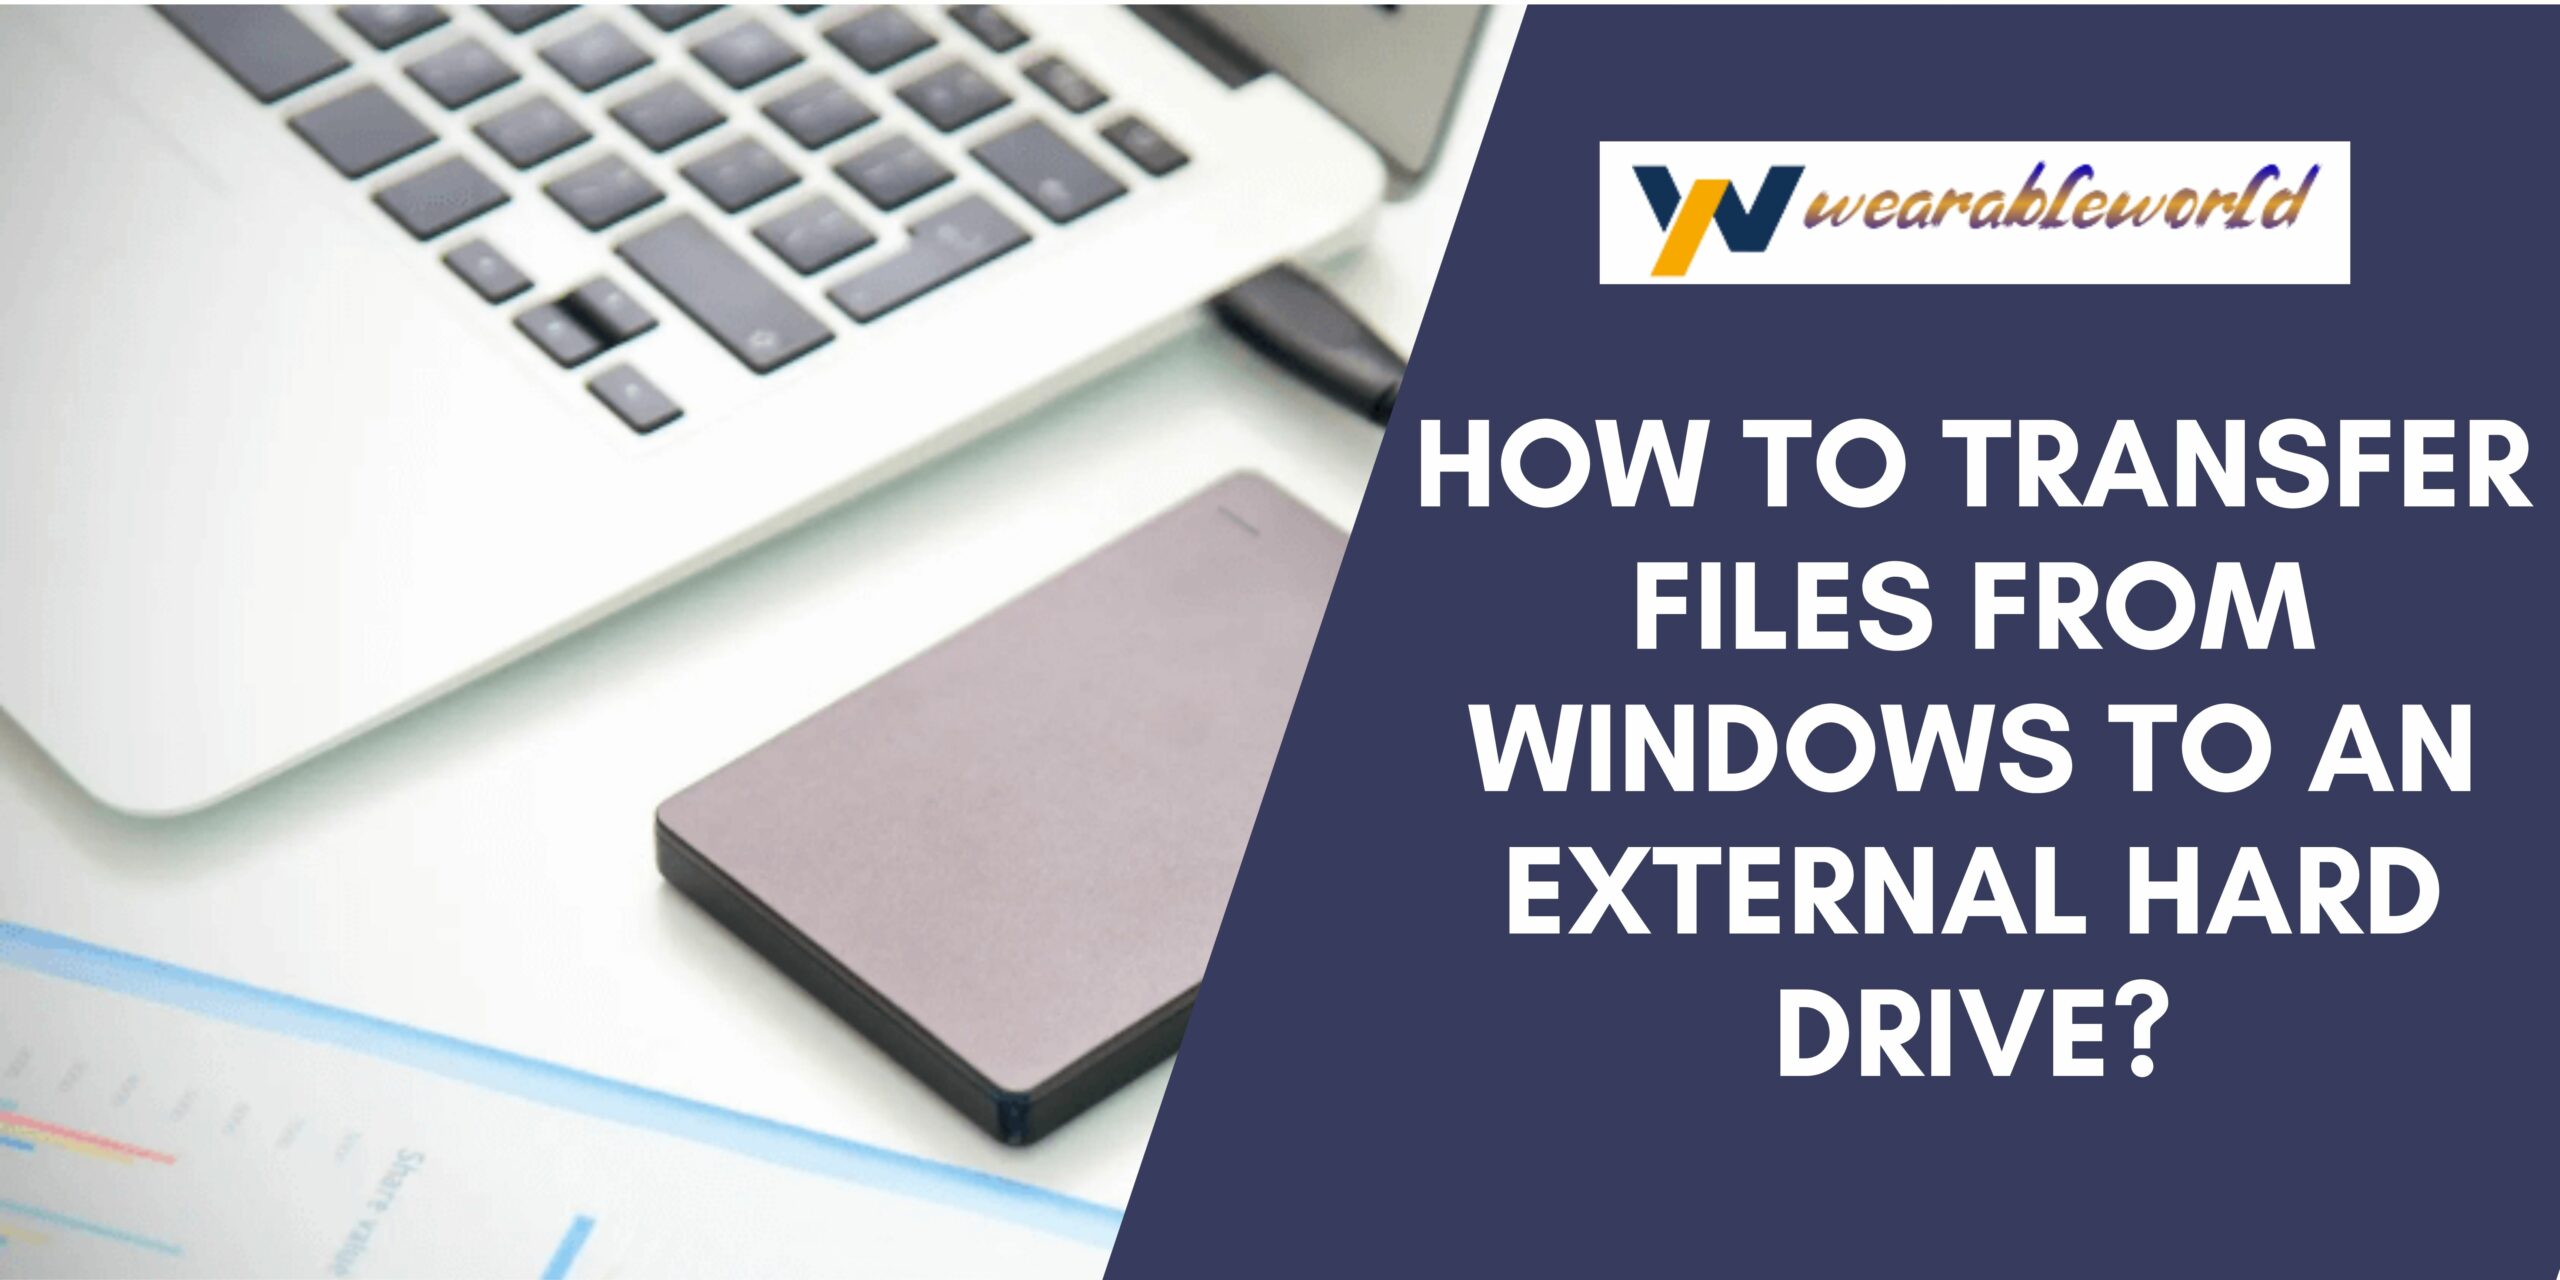 Transfer files from Windows to an external hard drive